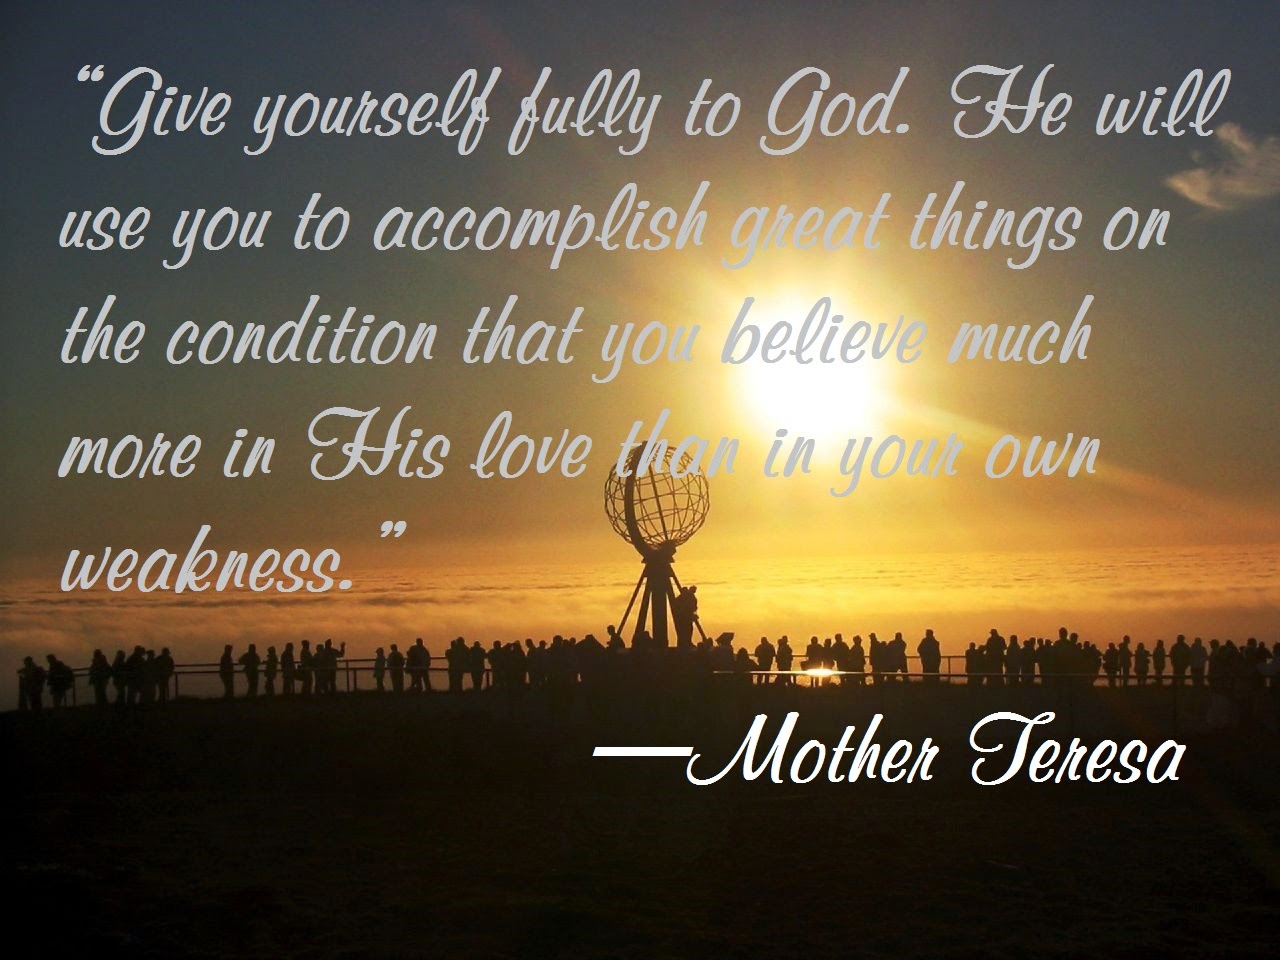 Quotes Mother Teresa and Anyway poem